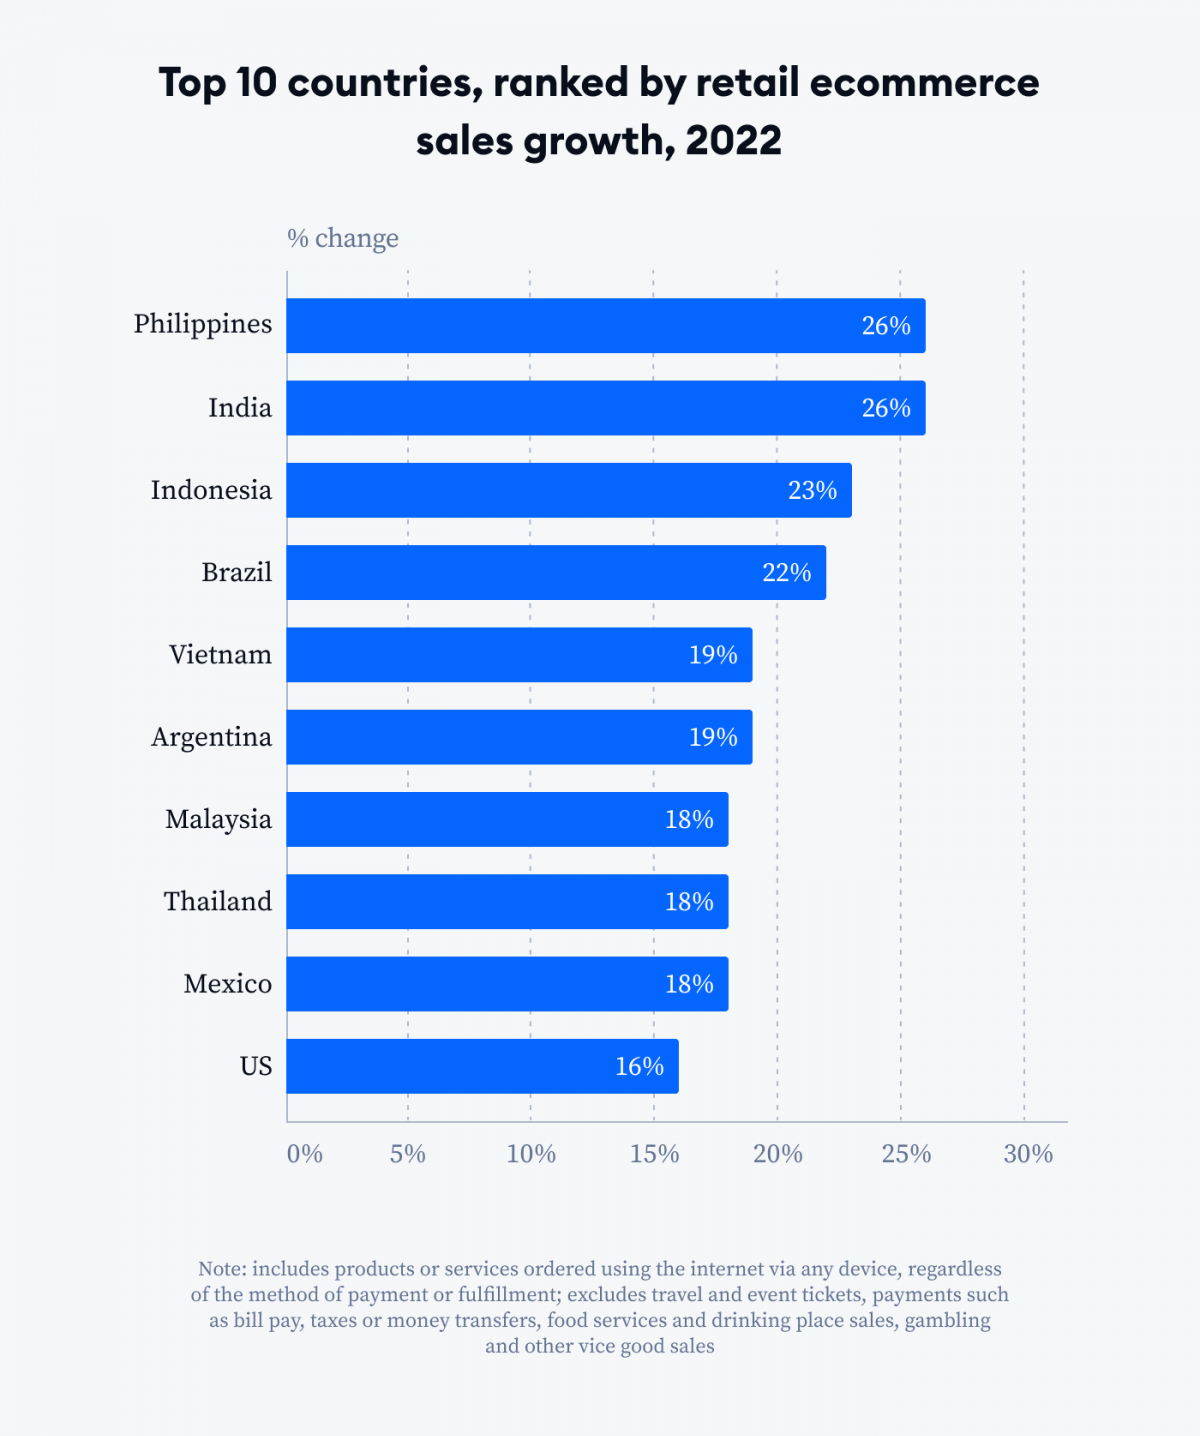 Top 10 countries ranked by retail eCommerce sales growth in 2022